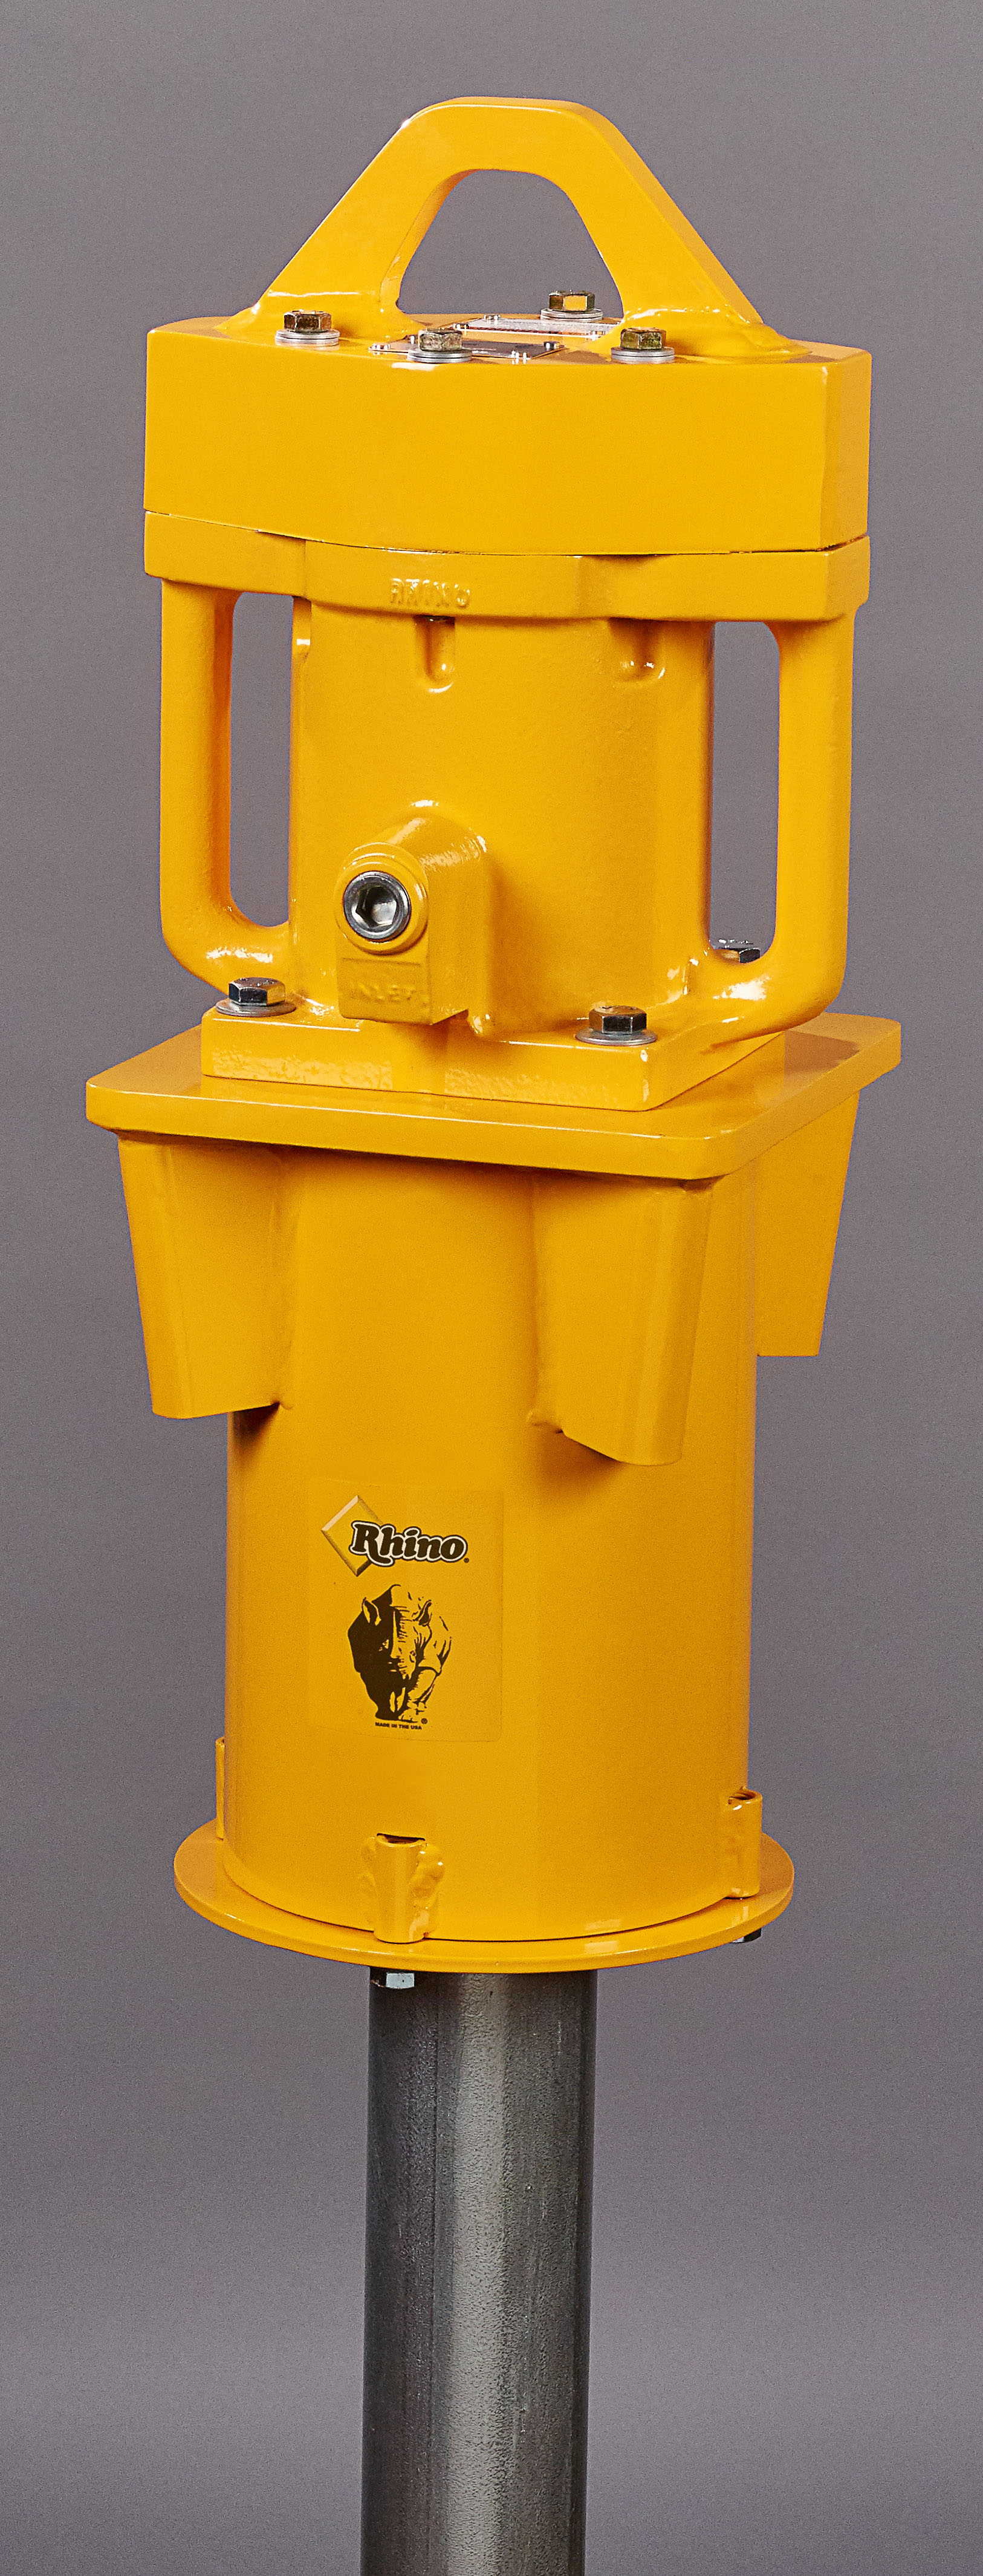 Rhino PD-200 HD Post Driver with 6"x6" Wood Piling Master Chuck